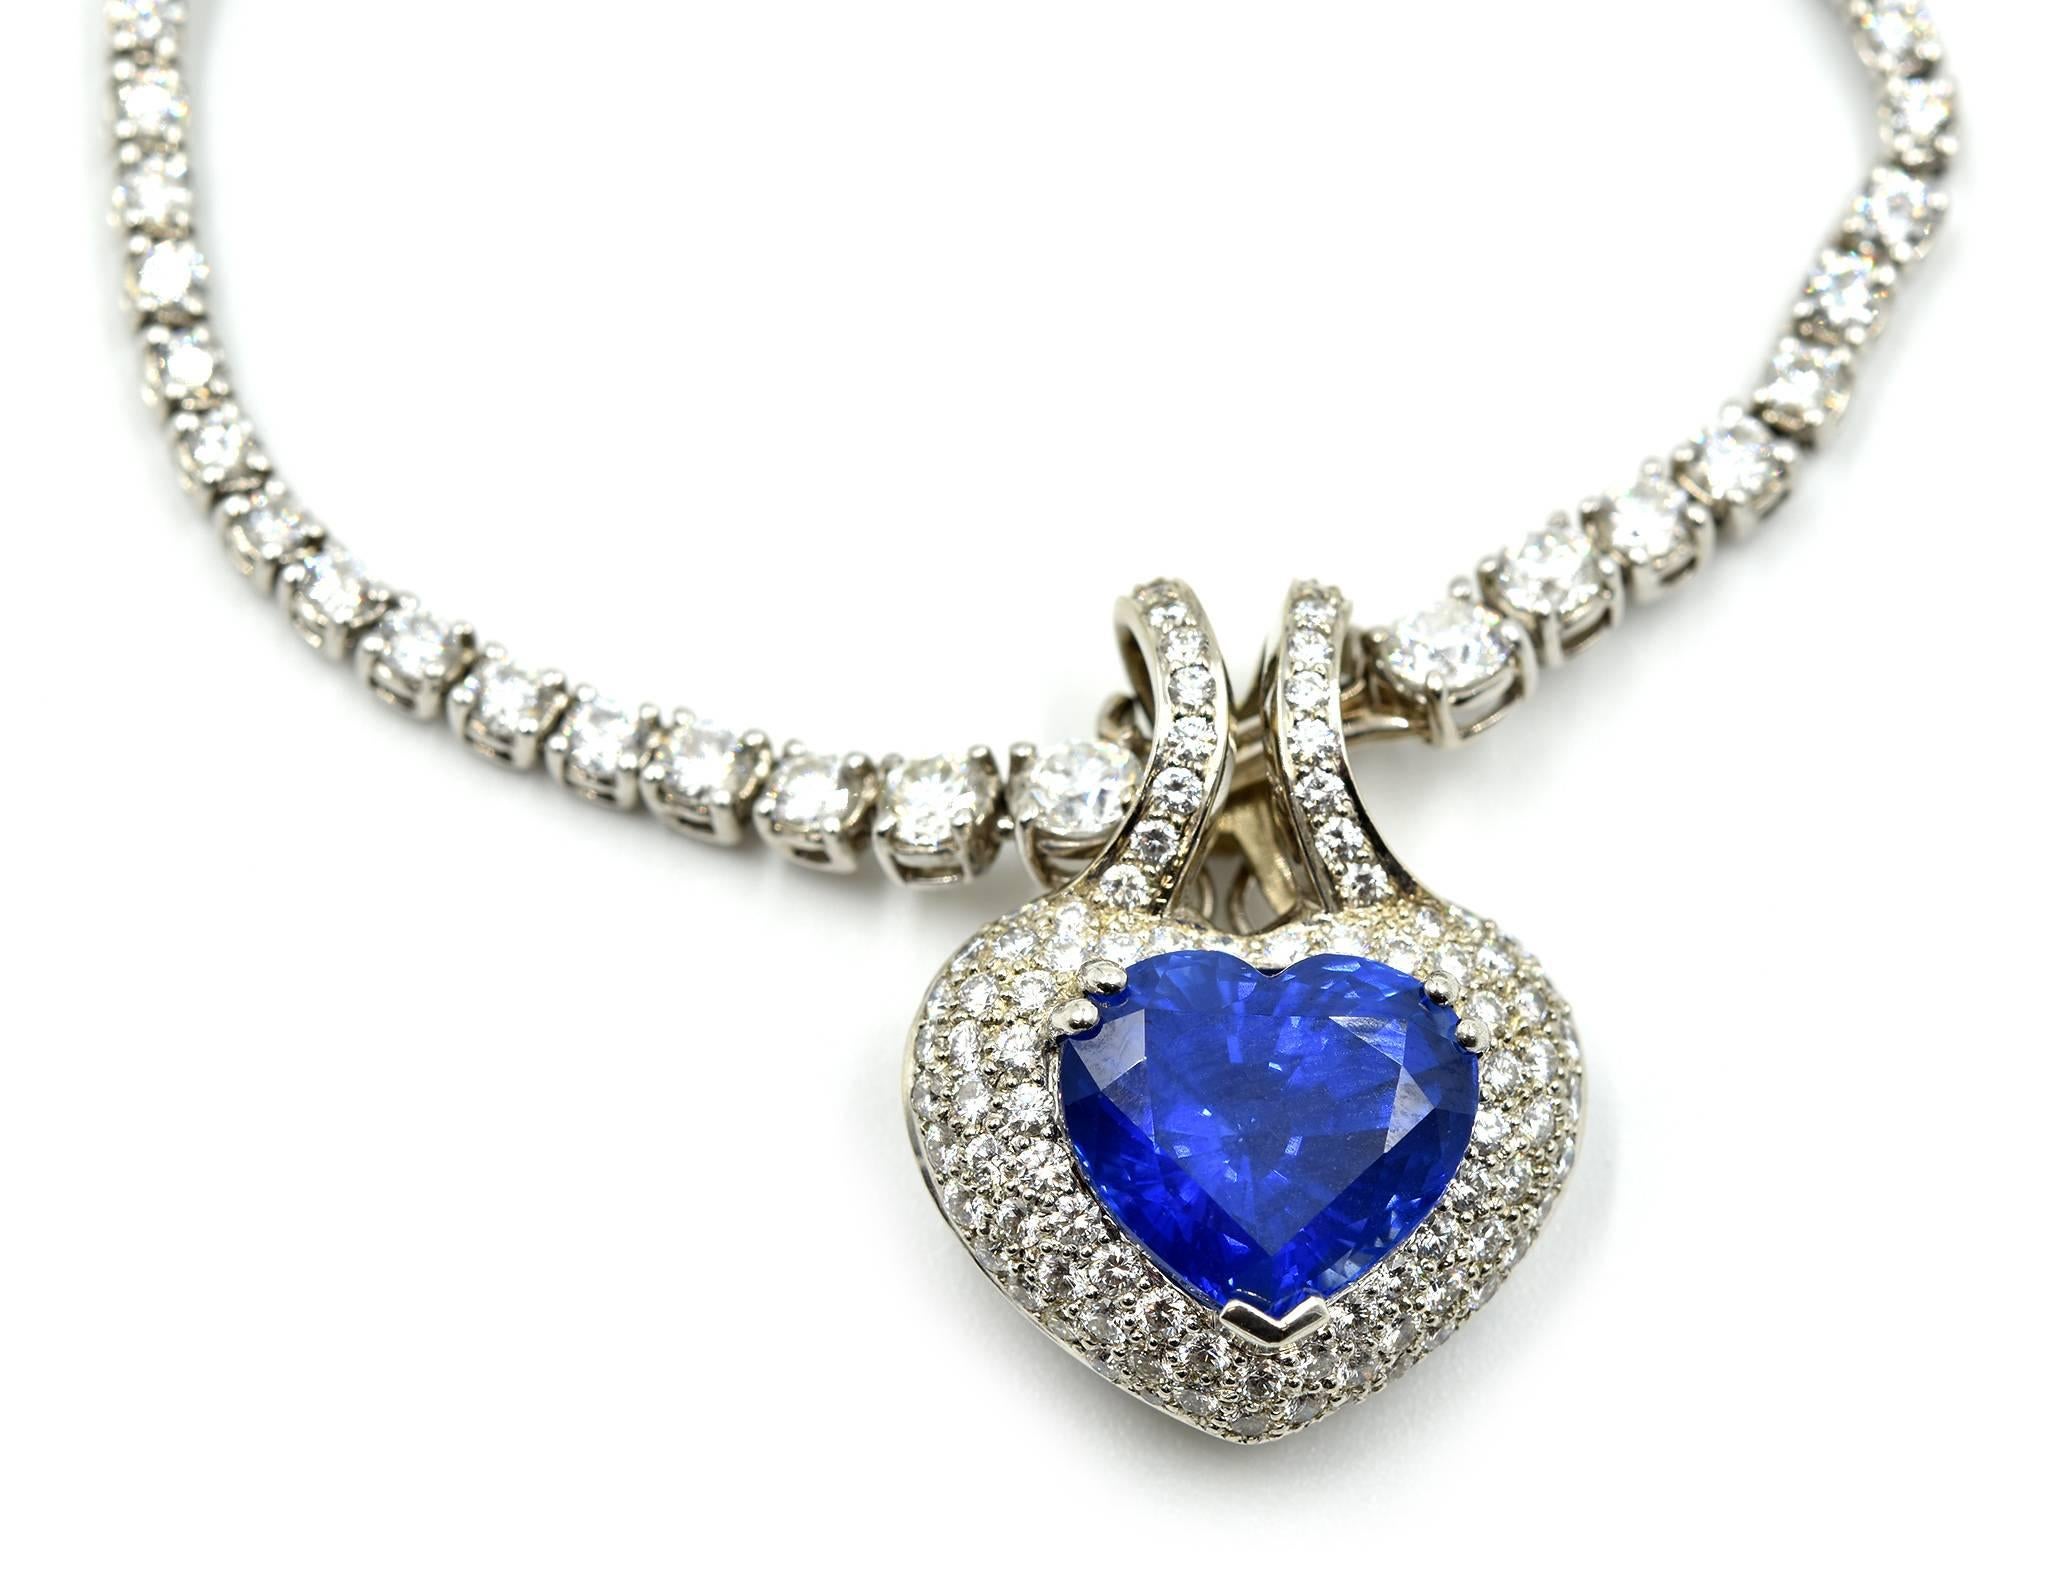 This necklace is breathtaking! A 13.50ct heart-cut sapphire sits in the center of an 18k white gold and diamond chain. The diamonds have an additional weight of 9.92 carats! The diamonds are graded G in color and VS in clarity. The pendant measures